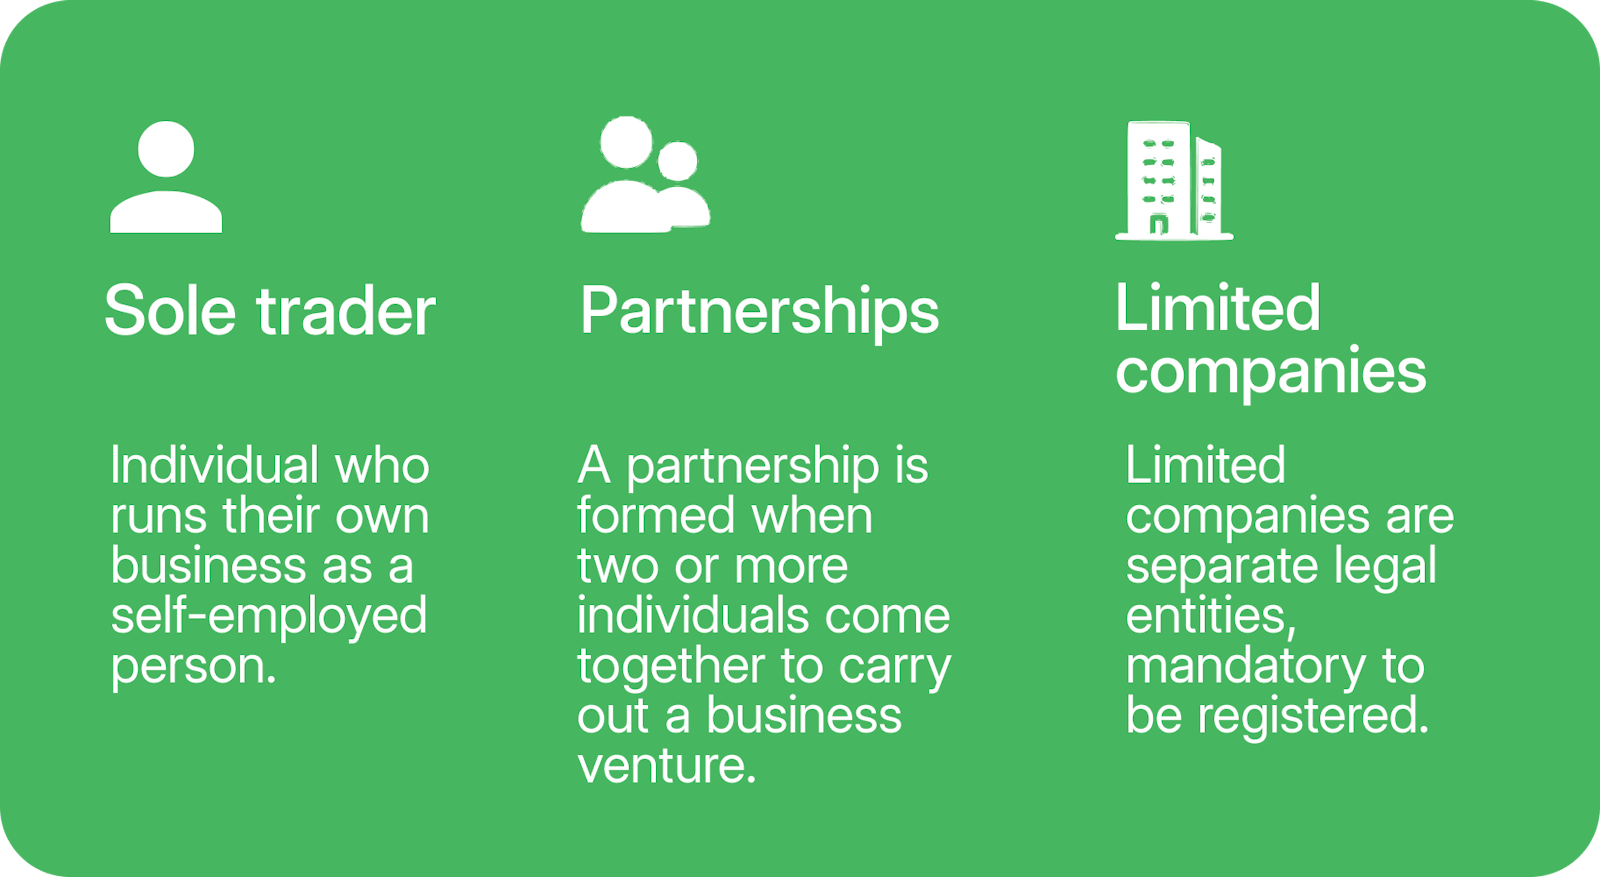 Image explaining the differences between a sole trader, partnerships and limited companies